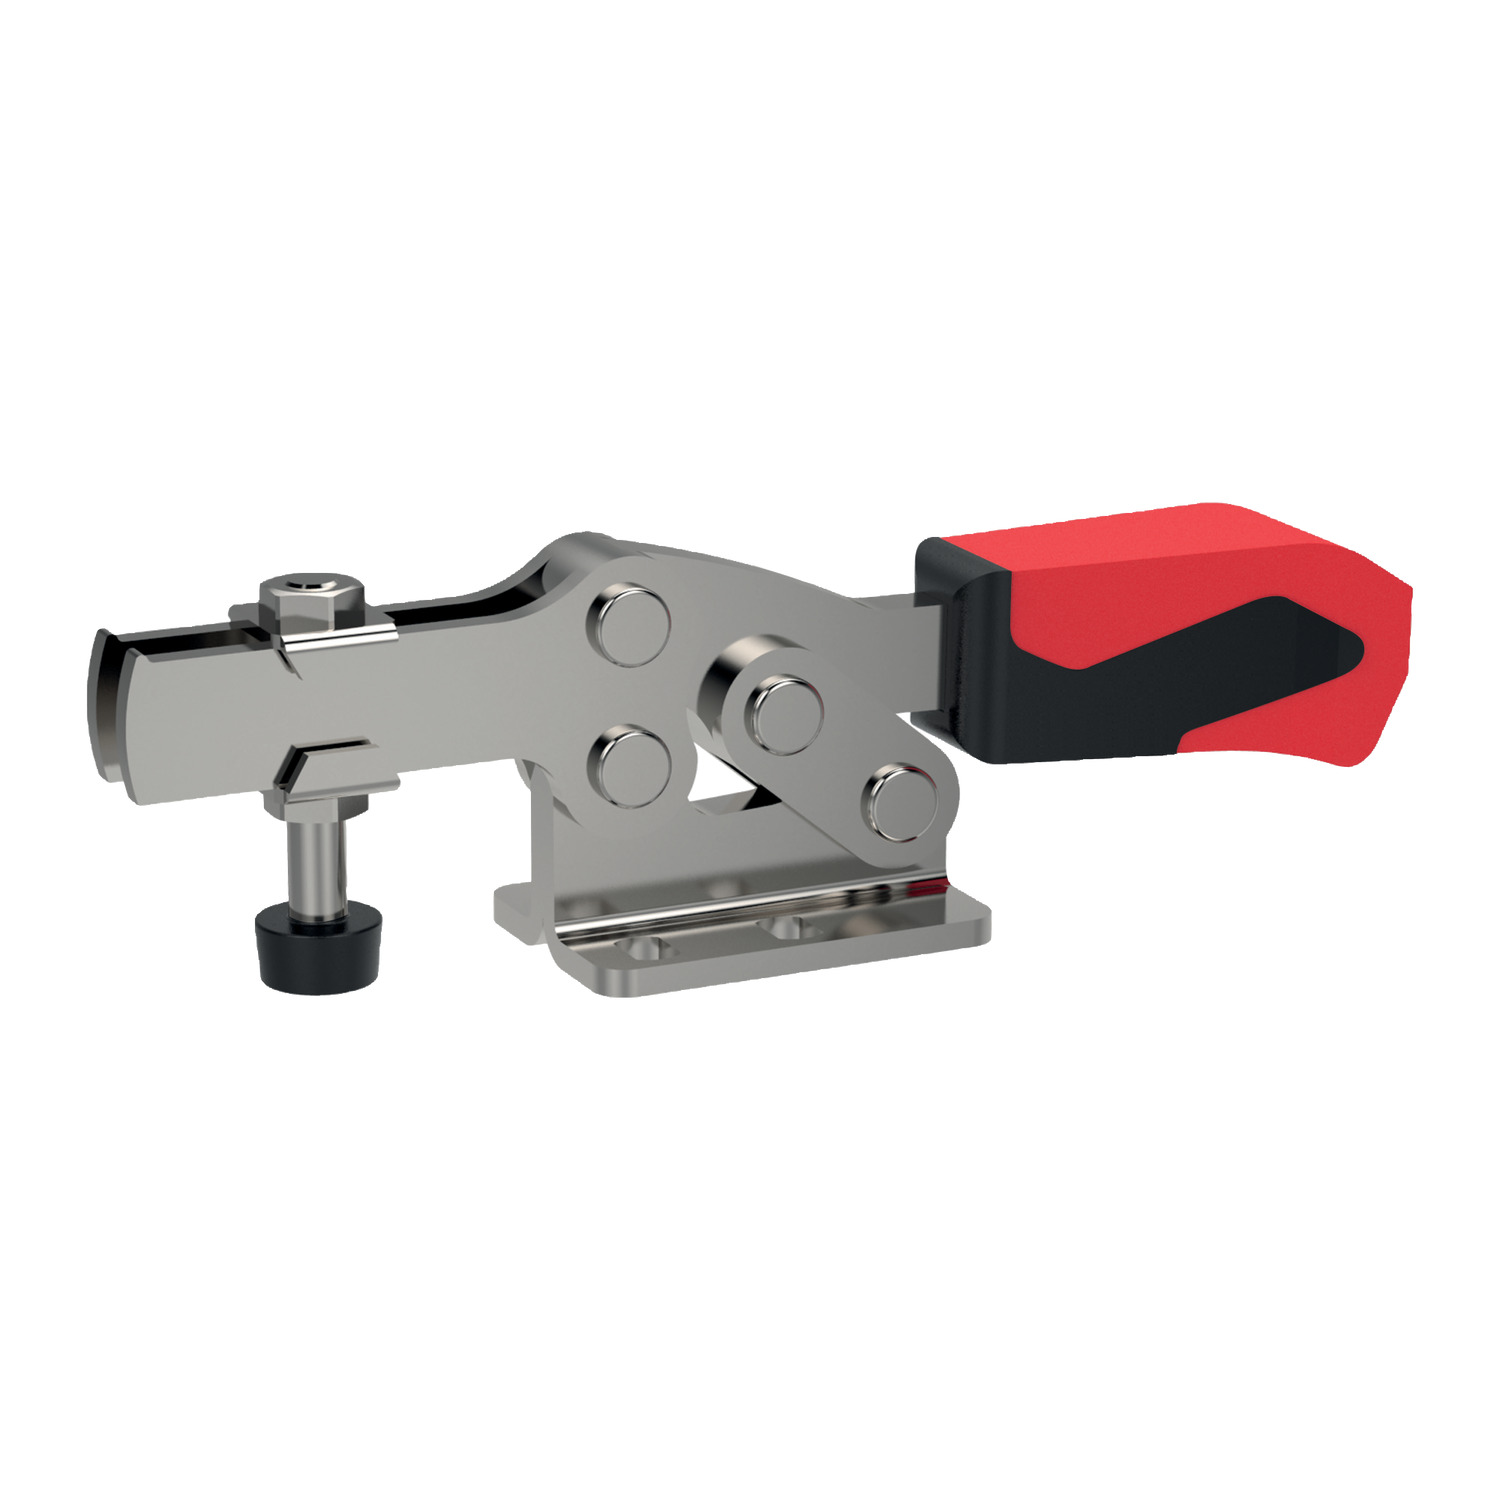 41001.W0304 Horizontal Toggle Clamp Plus increased clamping force - 4 - 3,5 - 8,0 - M10x76